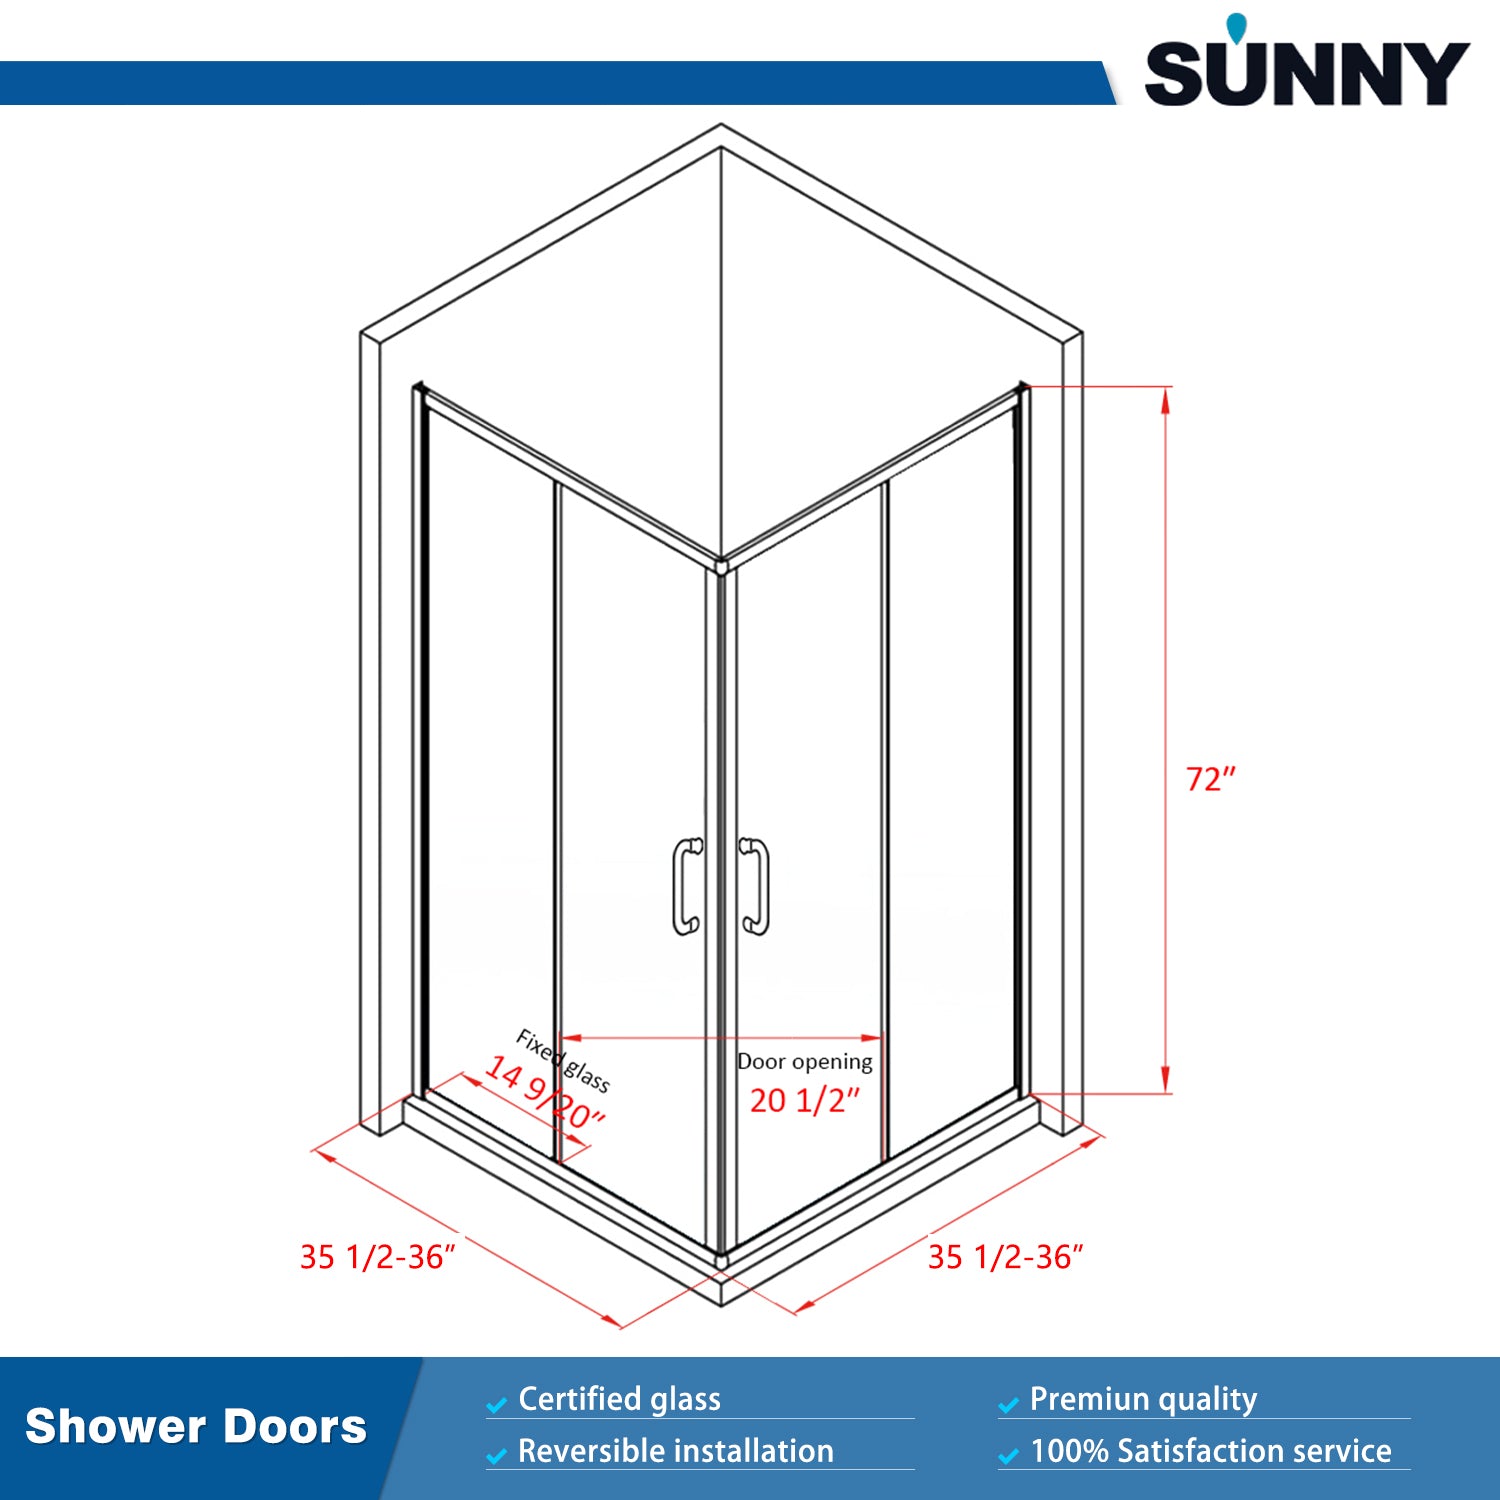 SUNNY SHOWER 36 in. D x 36 in. W x 72 in. H Brushed Nickel Finish Corner Entry Enclosure With Sliding Doors Size Chart